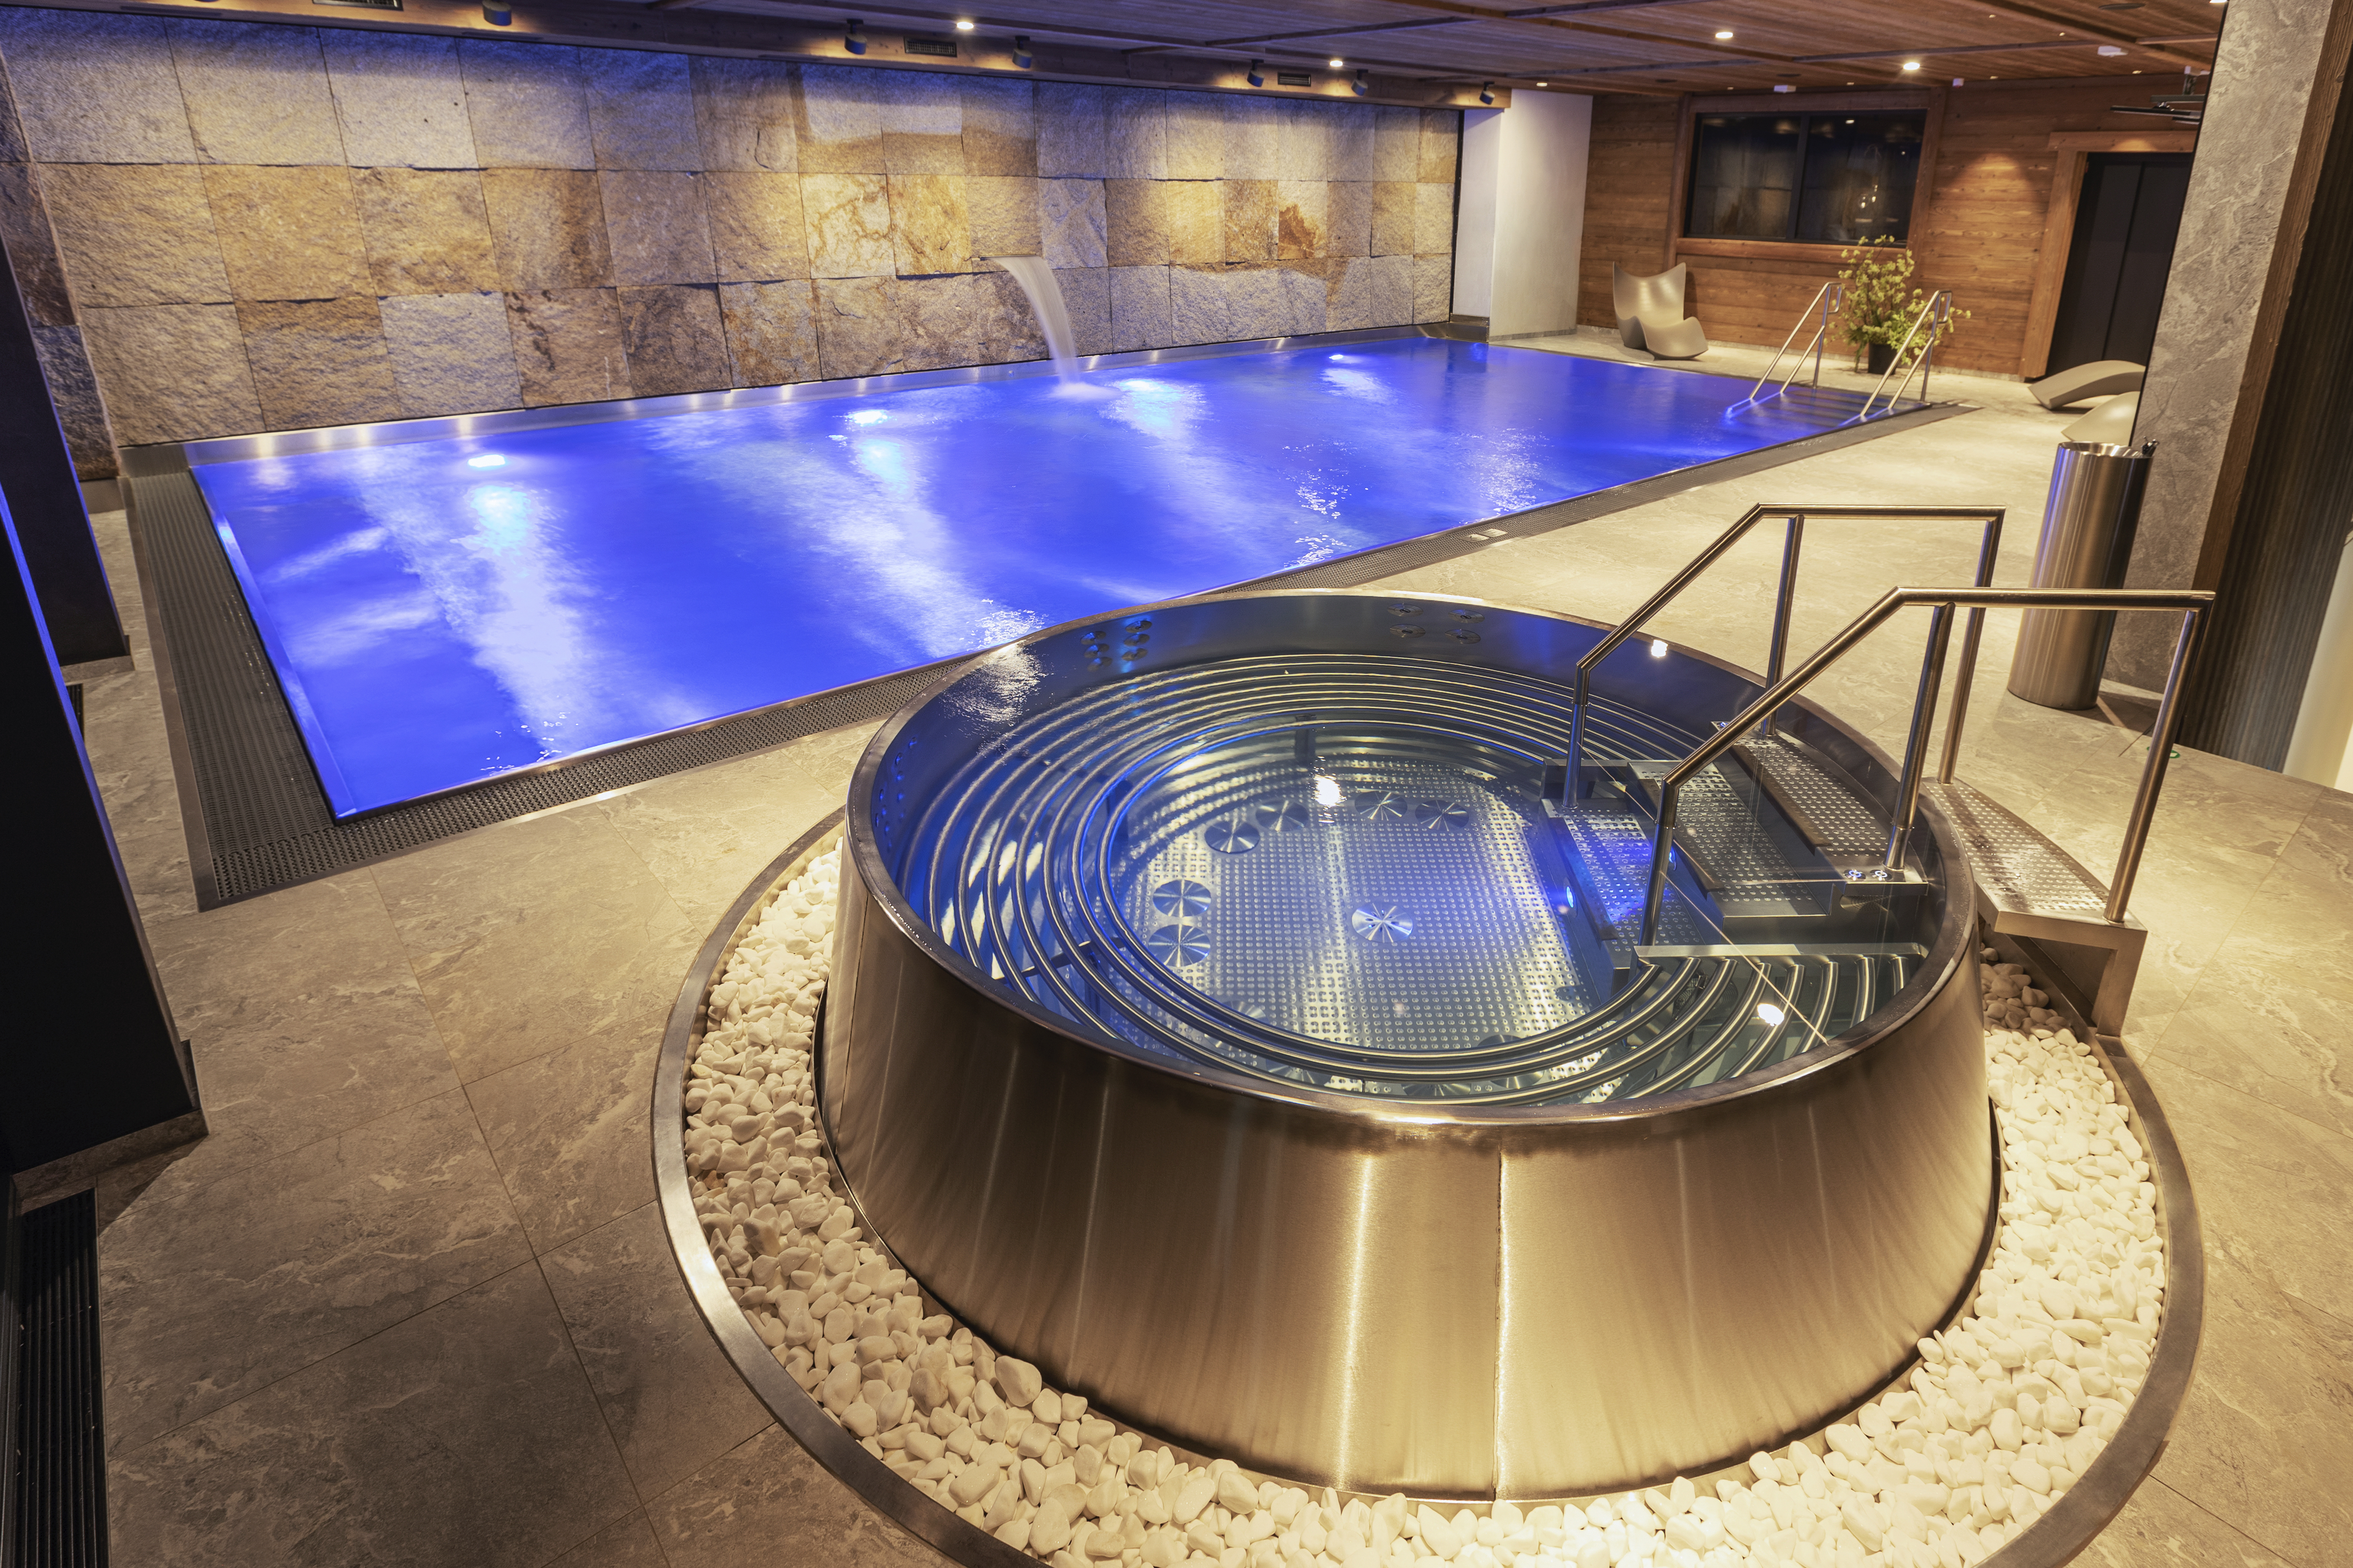 IMAGINOX overflow stainless steel whirlpool in a commercial wellness